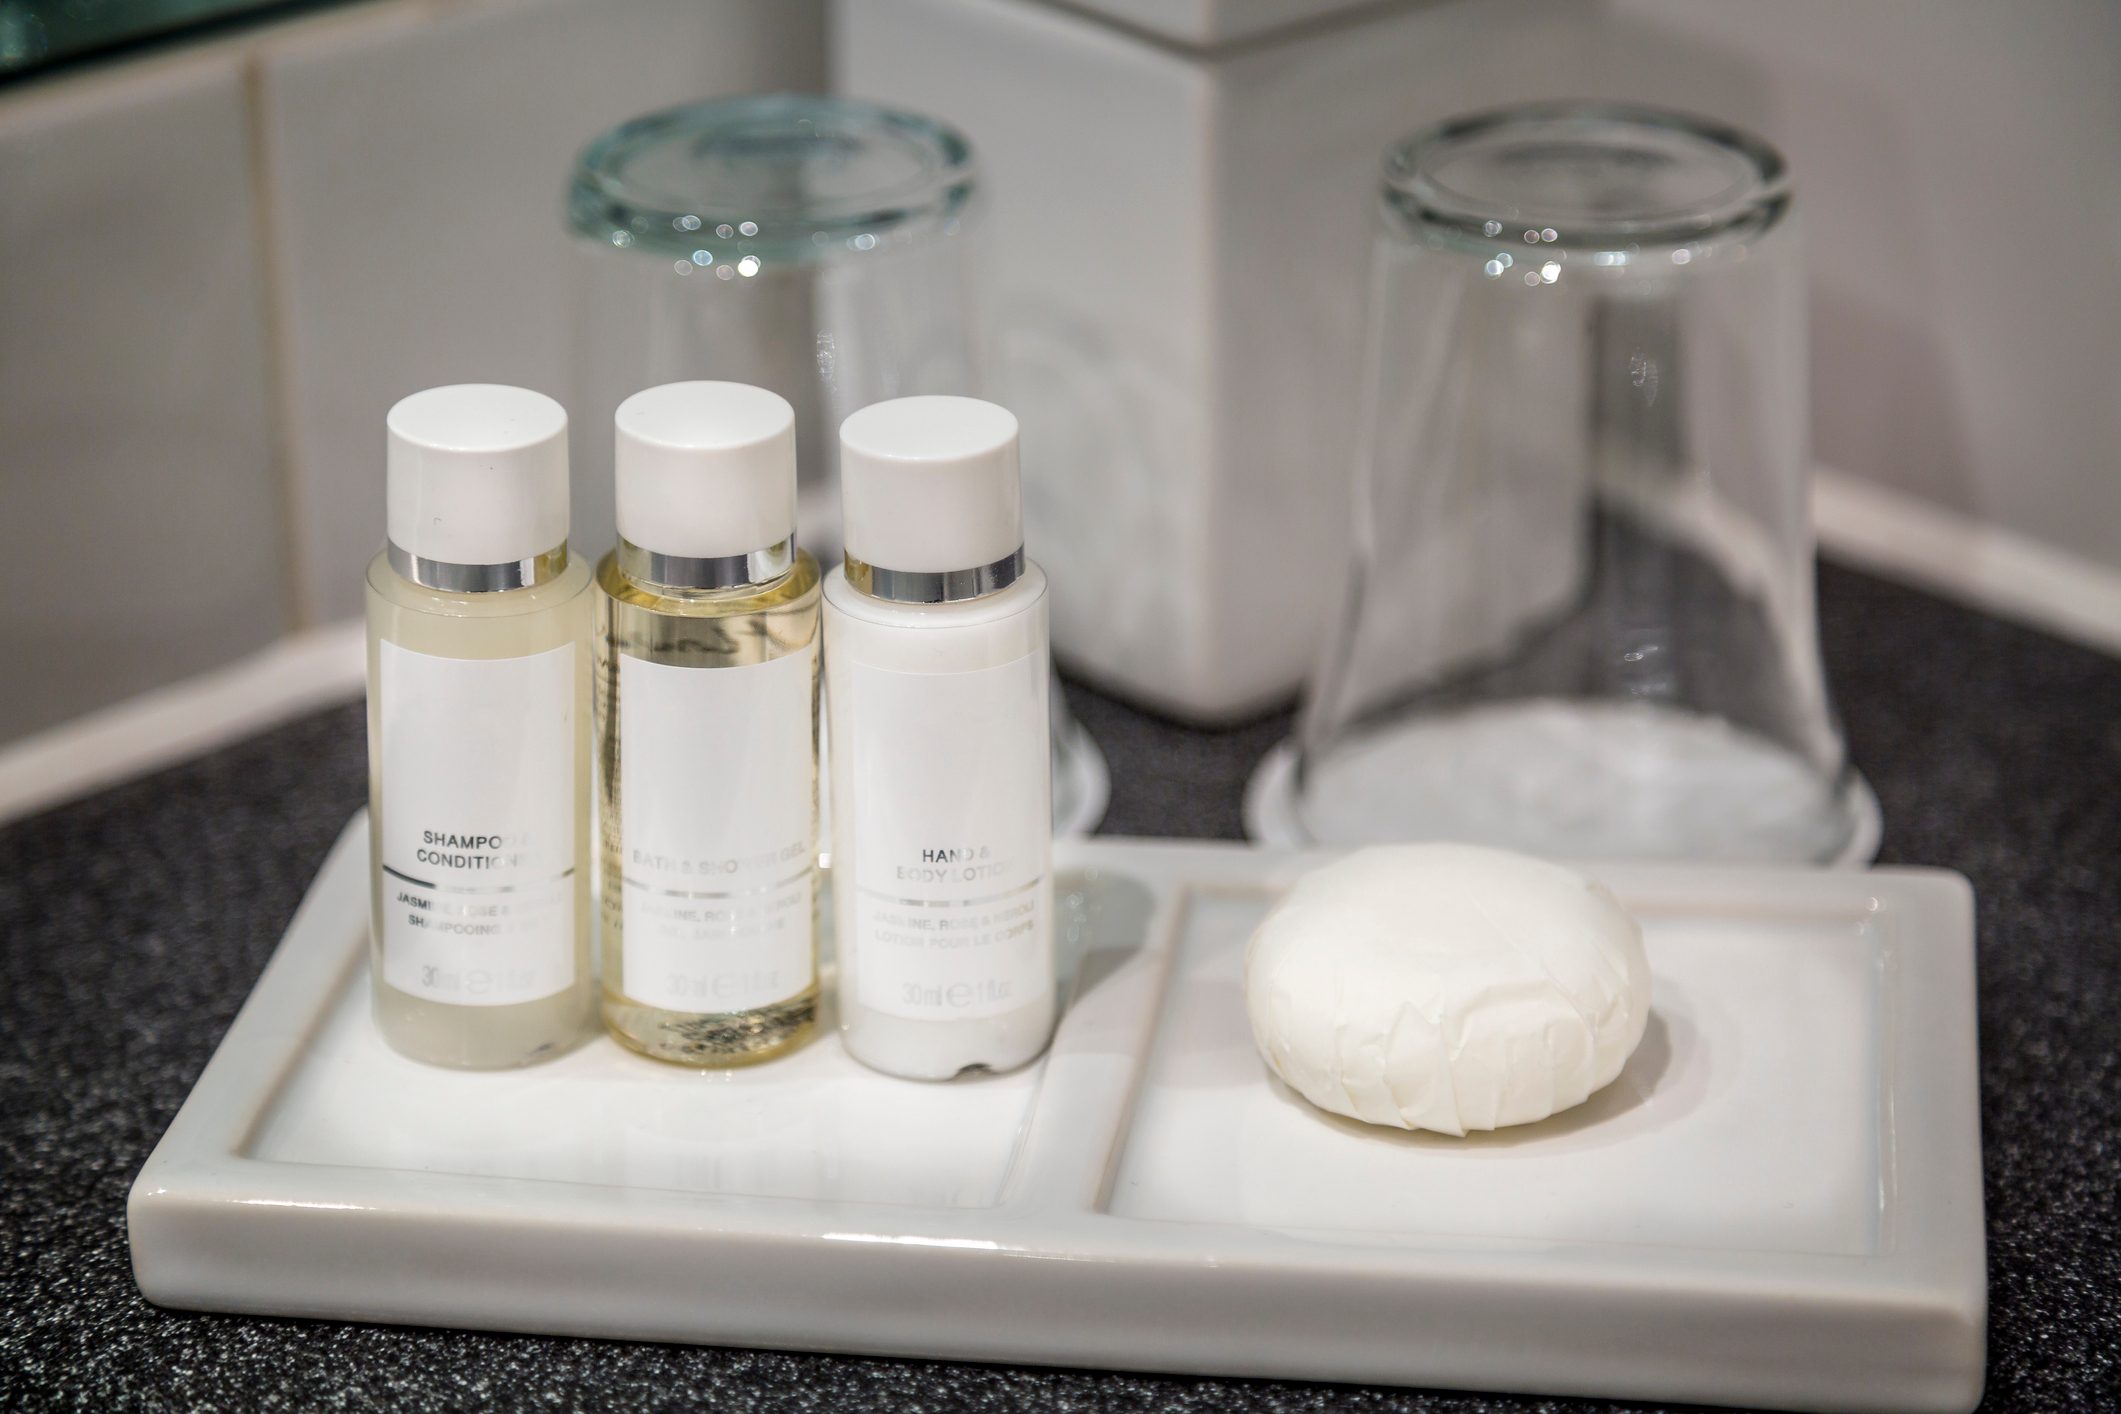 <p>If there's one thing most hotels reliably have in their rooms, it's soap. And according to <span>Ousman Conteh, general manager at <span>Claridge House Chicago</span>, these mini bottles are OK to take from your hotel room. "O</span><span>ften hotels receive negotiated pricing for items from another brand," he says. However, </span><span>Curt Asmussen, </span><span>managing director of <span>Obie Hospitality</span>, notes that it's not encouraged </span><span>to take these items—but guests aren't penalized in any way if they do. Make sure you know <a href="https://www.rd.com/list/things-you-should-never-ask-hotel-staff/">what you should never ask the hotel staff</a> before you go on your next trip.</span></p>